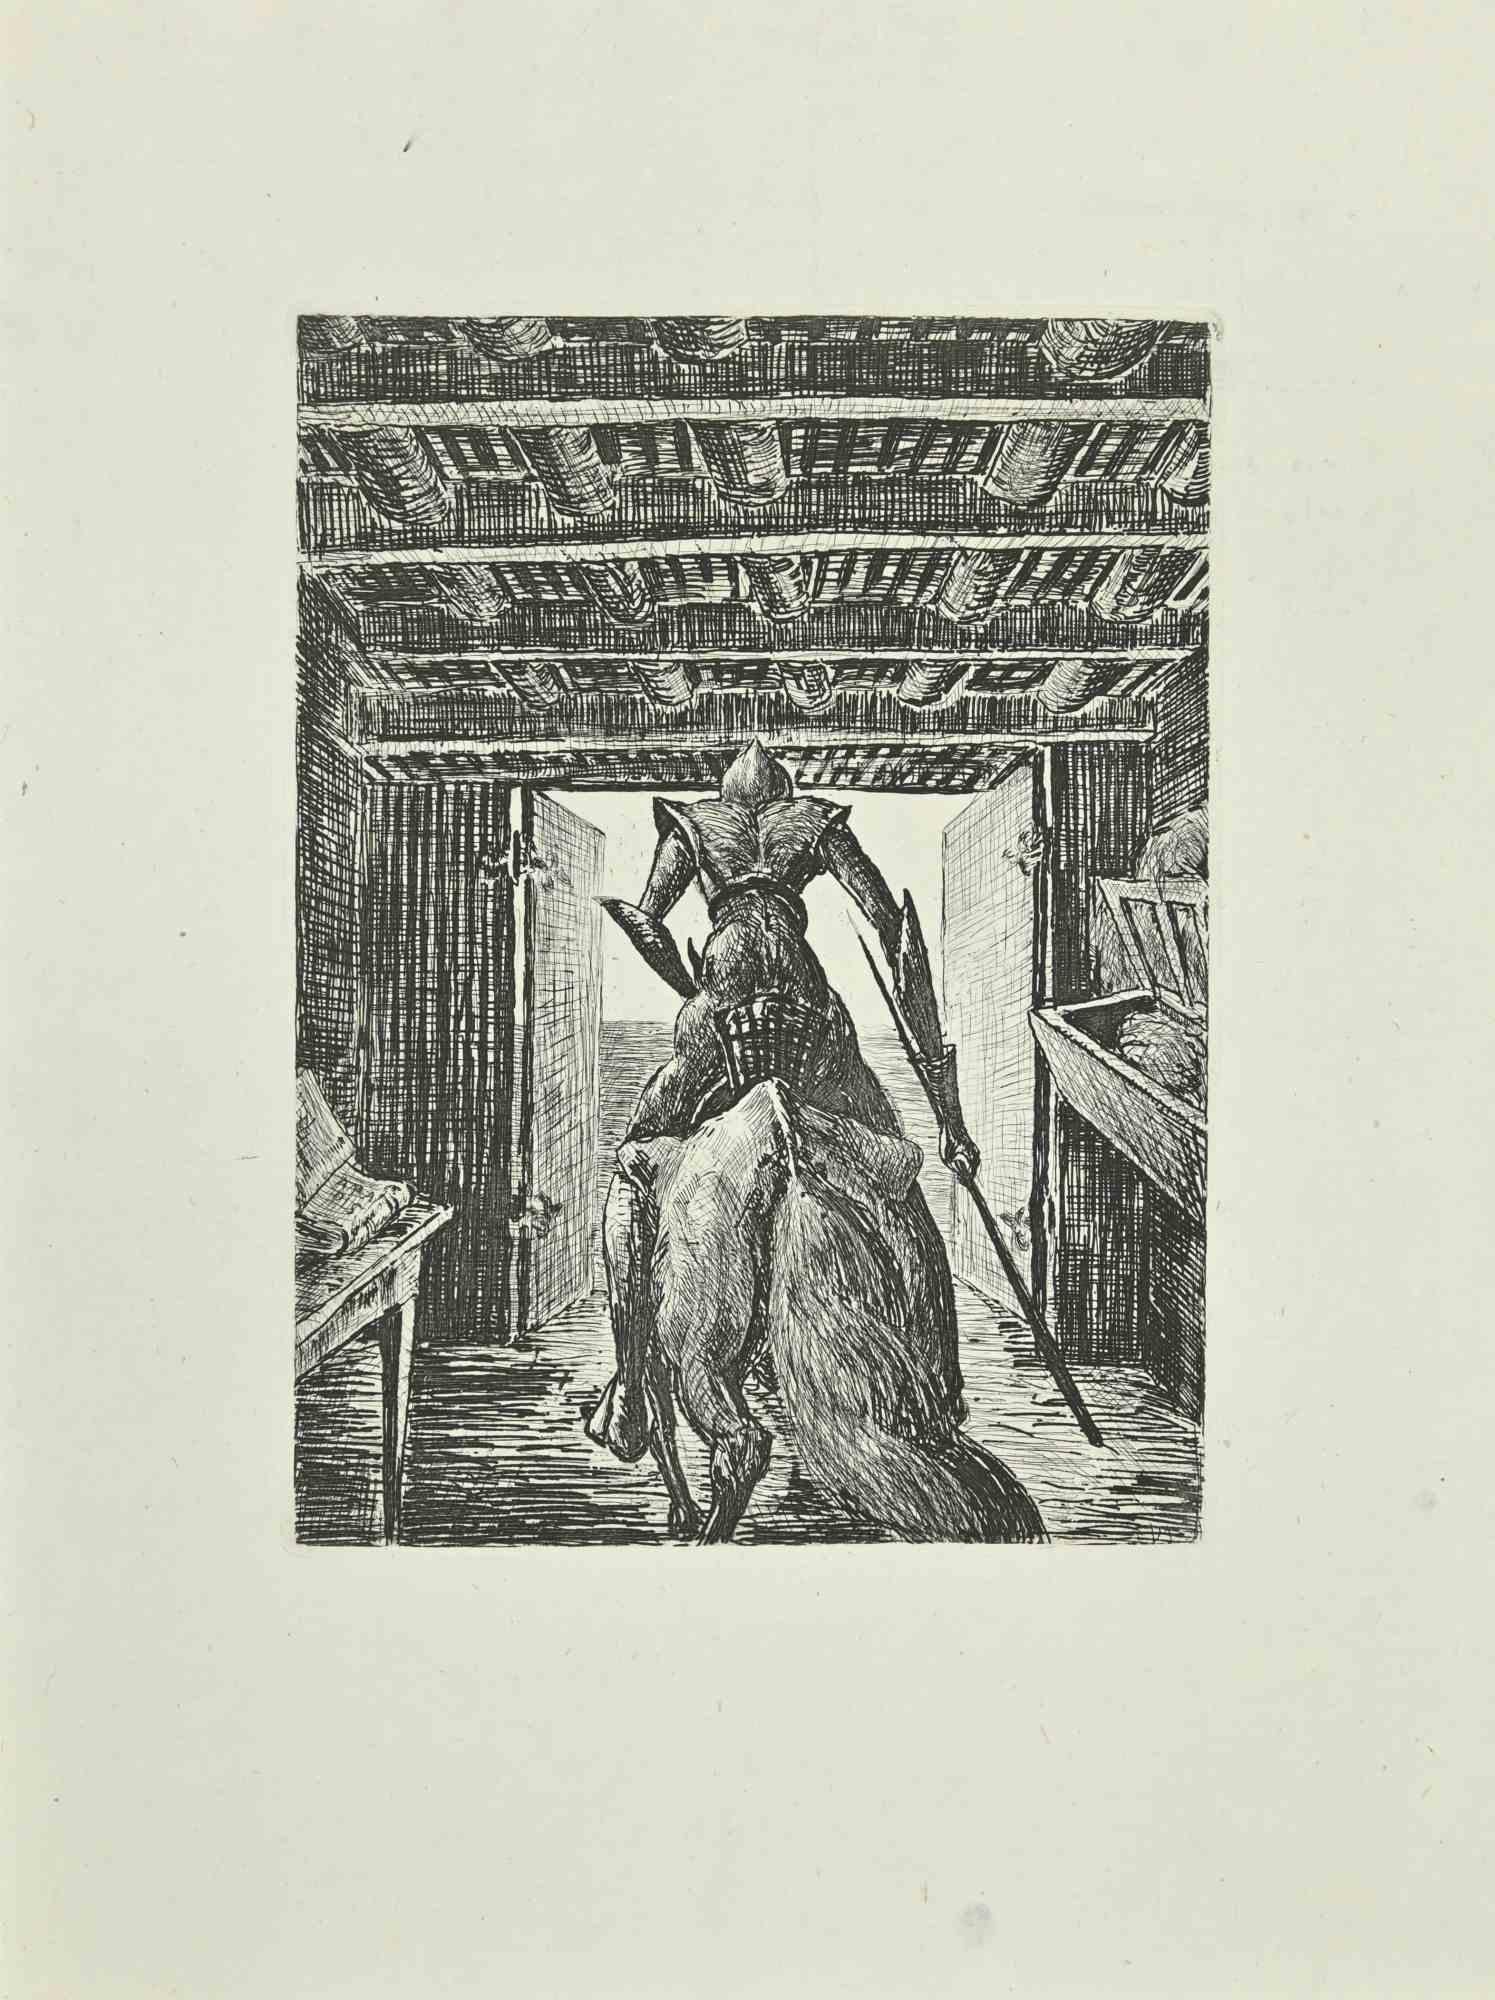 Don Quixote Leaves the Stable on his Horse is an etching and drypoint print on ivory-colored China paper, realized by Wladyslaw Jahl in 1951.

It belongs to a limited edition of 125 specimens.

Good conditions.

The artwork represents a visual scene